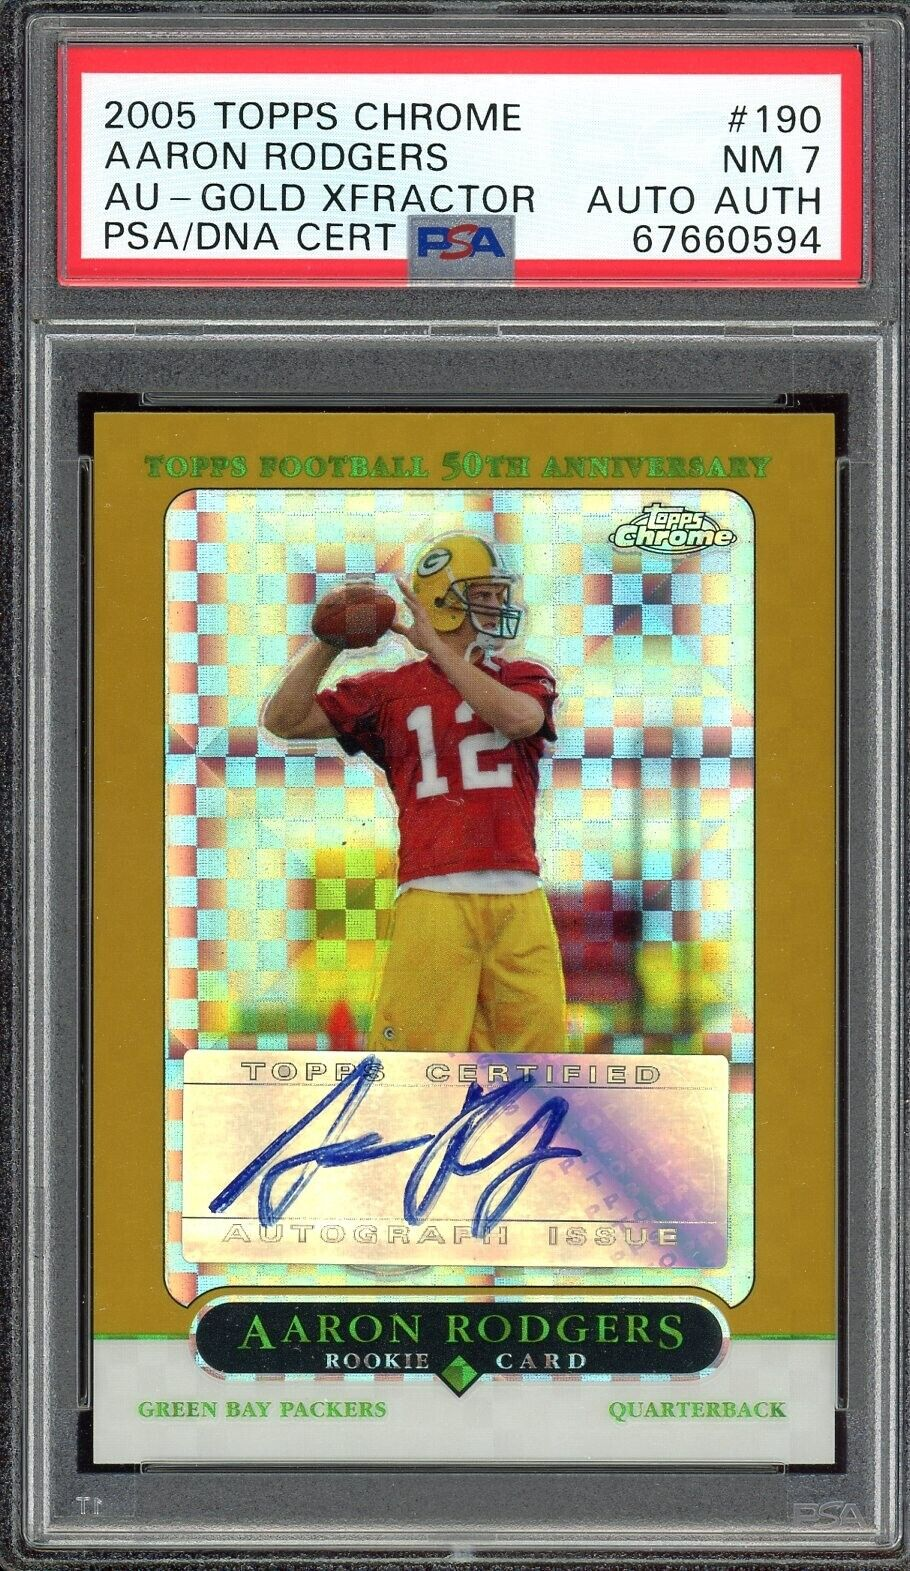 Most valuable Aaron Rodgers rookie cards: 2005 Topps Chrome Gold xFractor